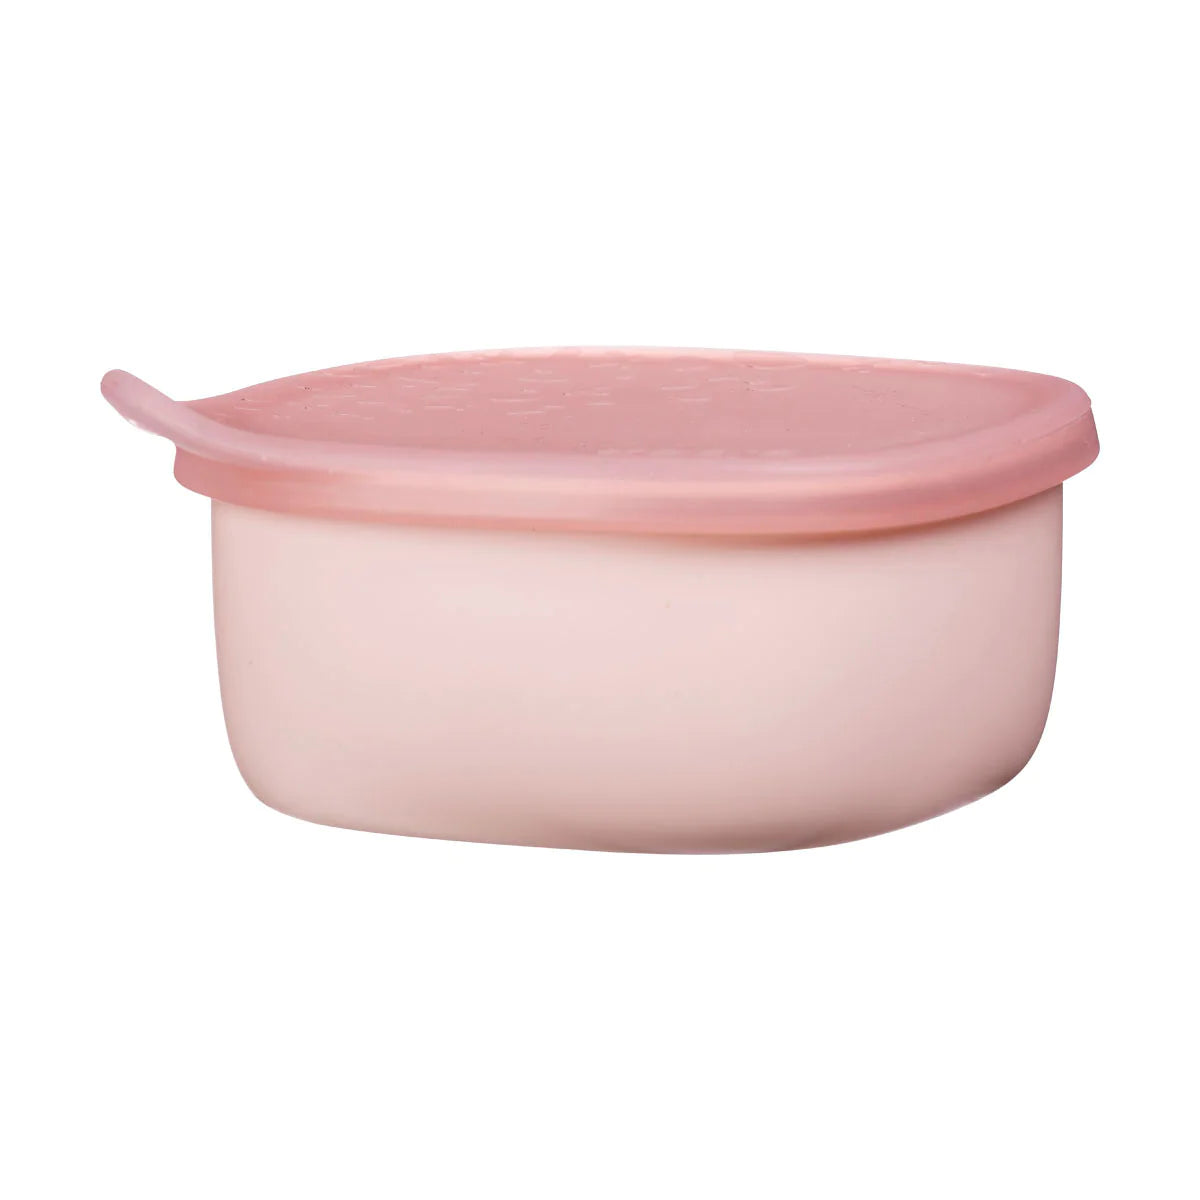 b.box Lunch Tub in Berry available at Bear & Moo